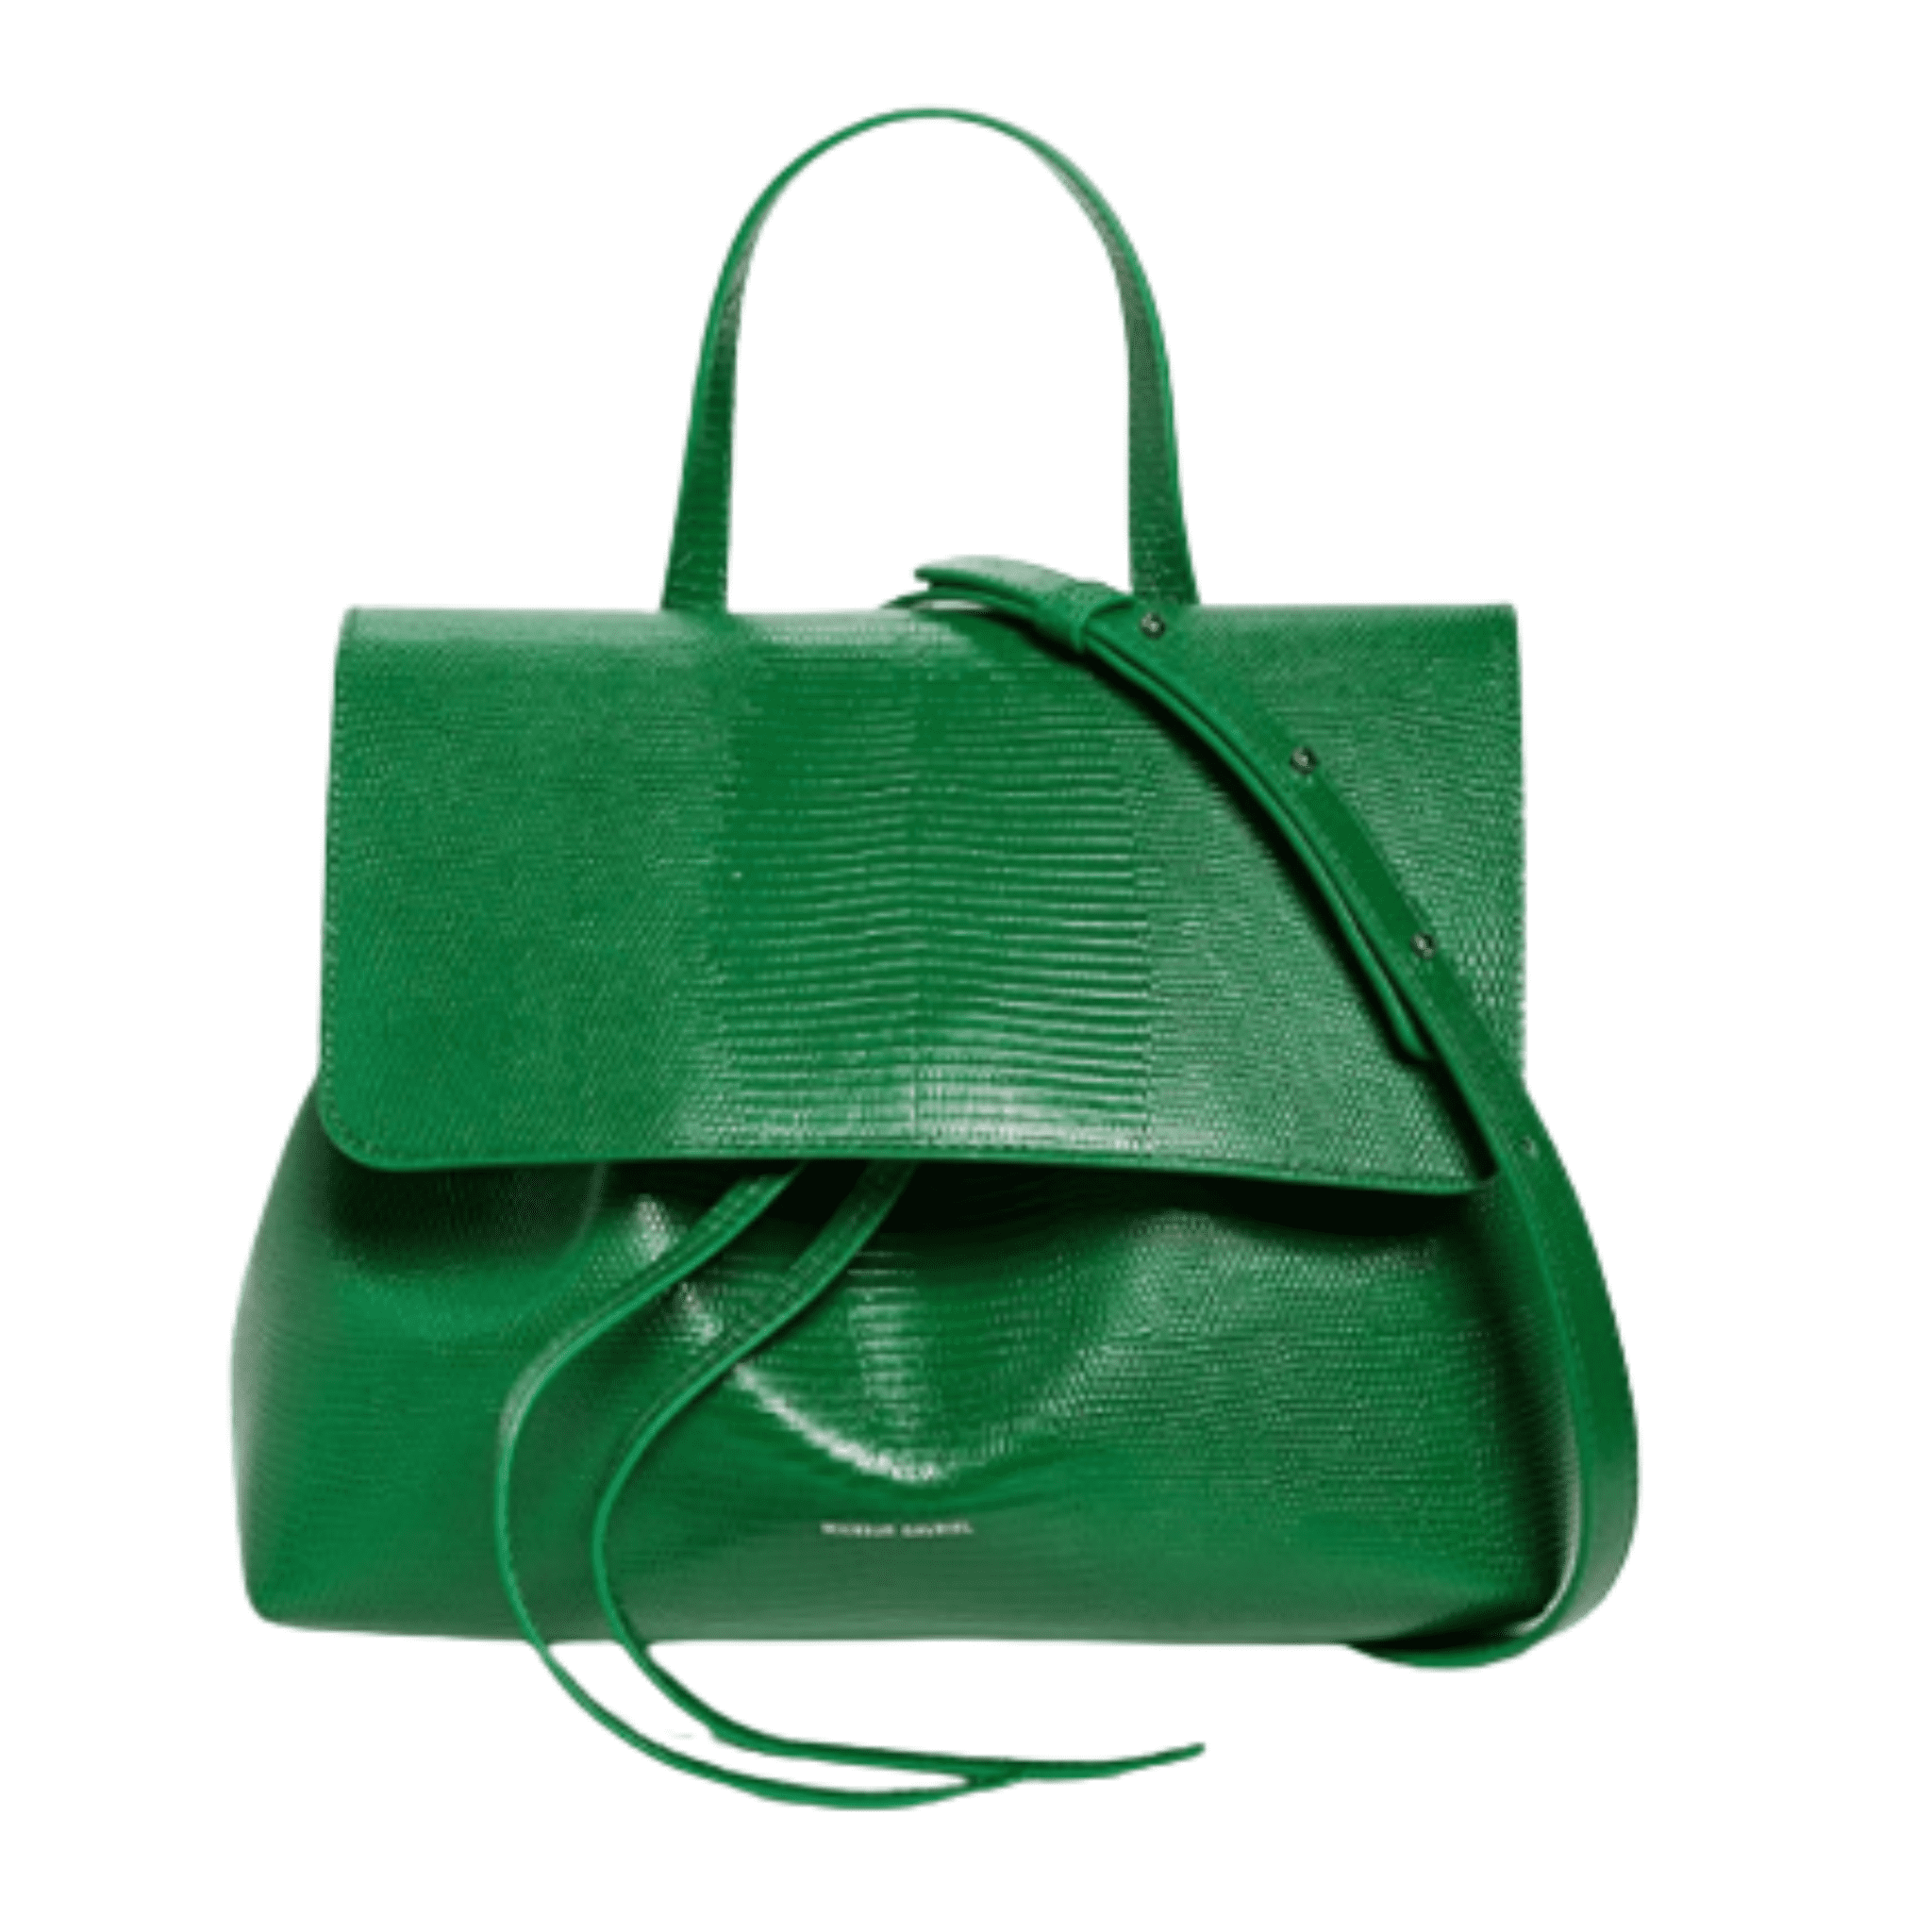 Green backpack with drawstring closure.